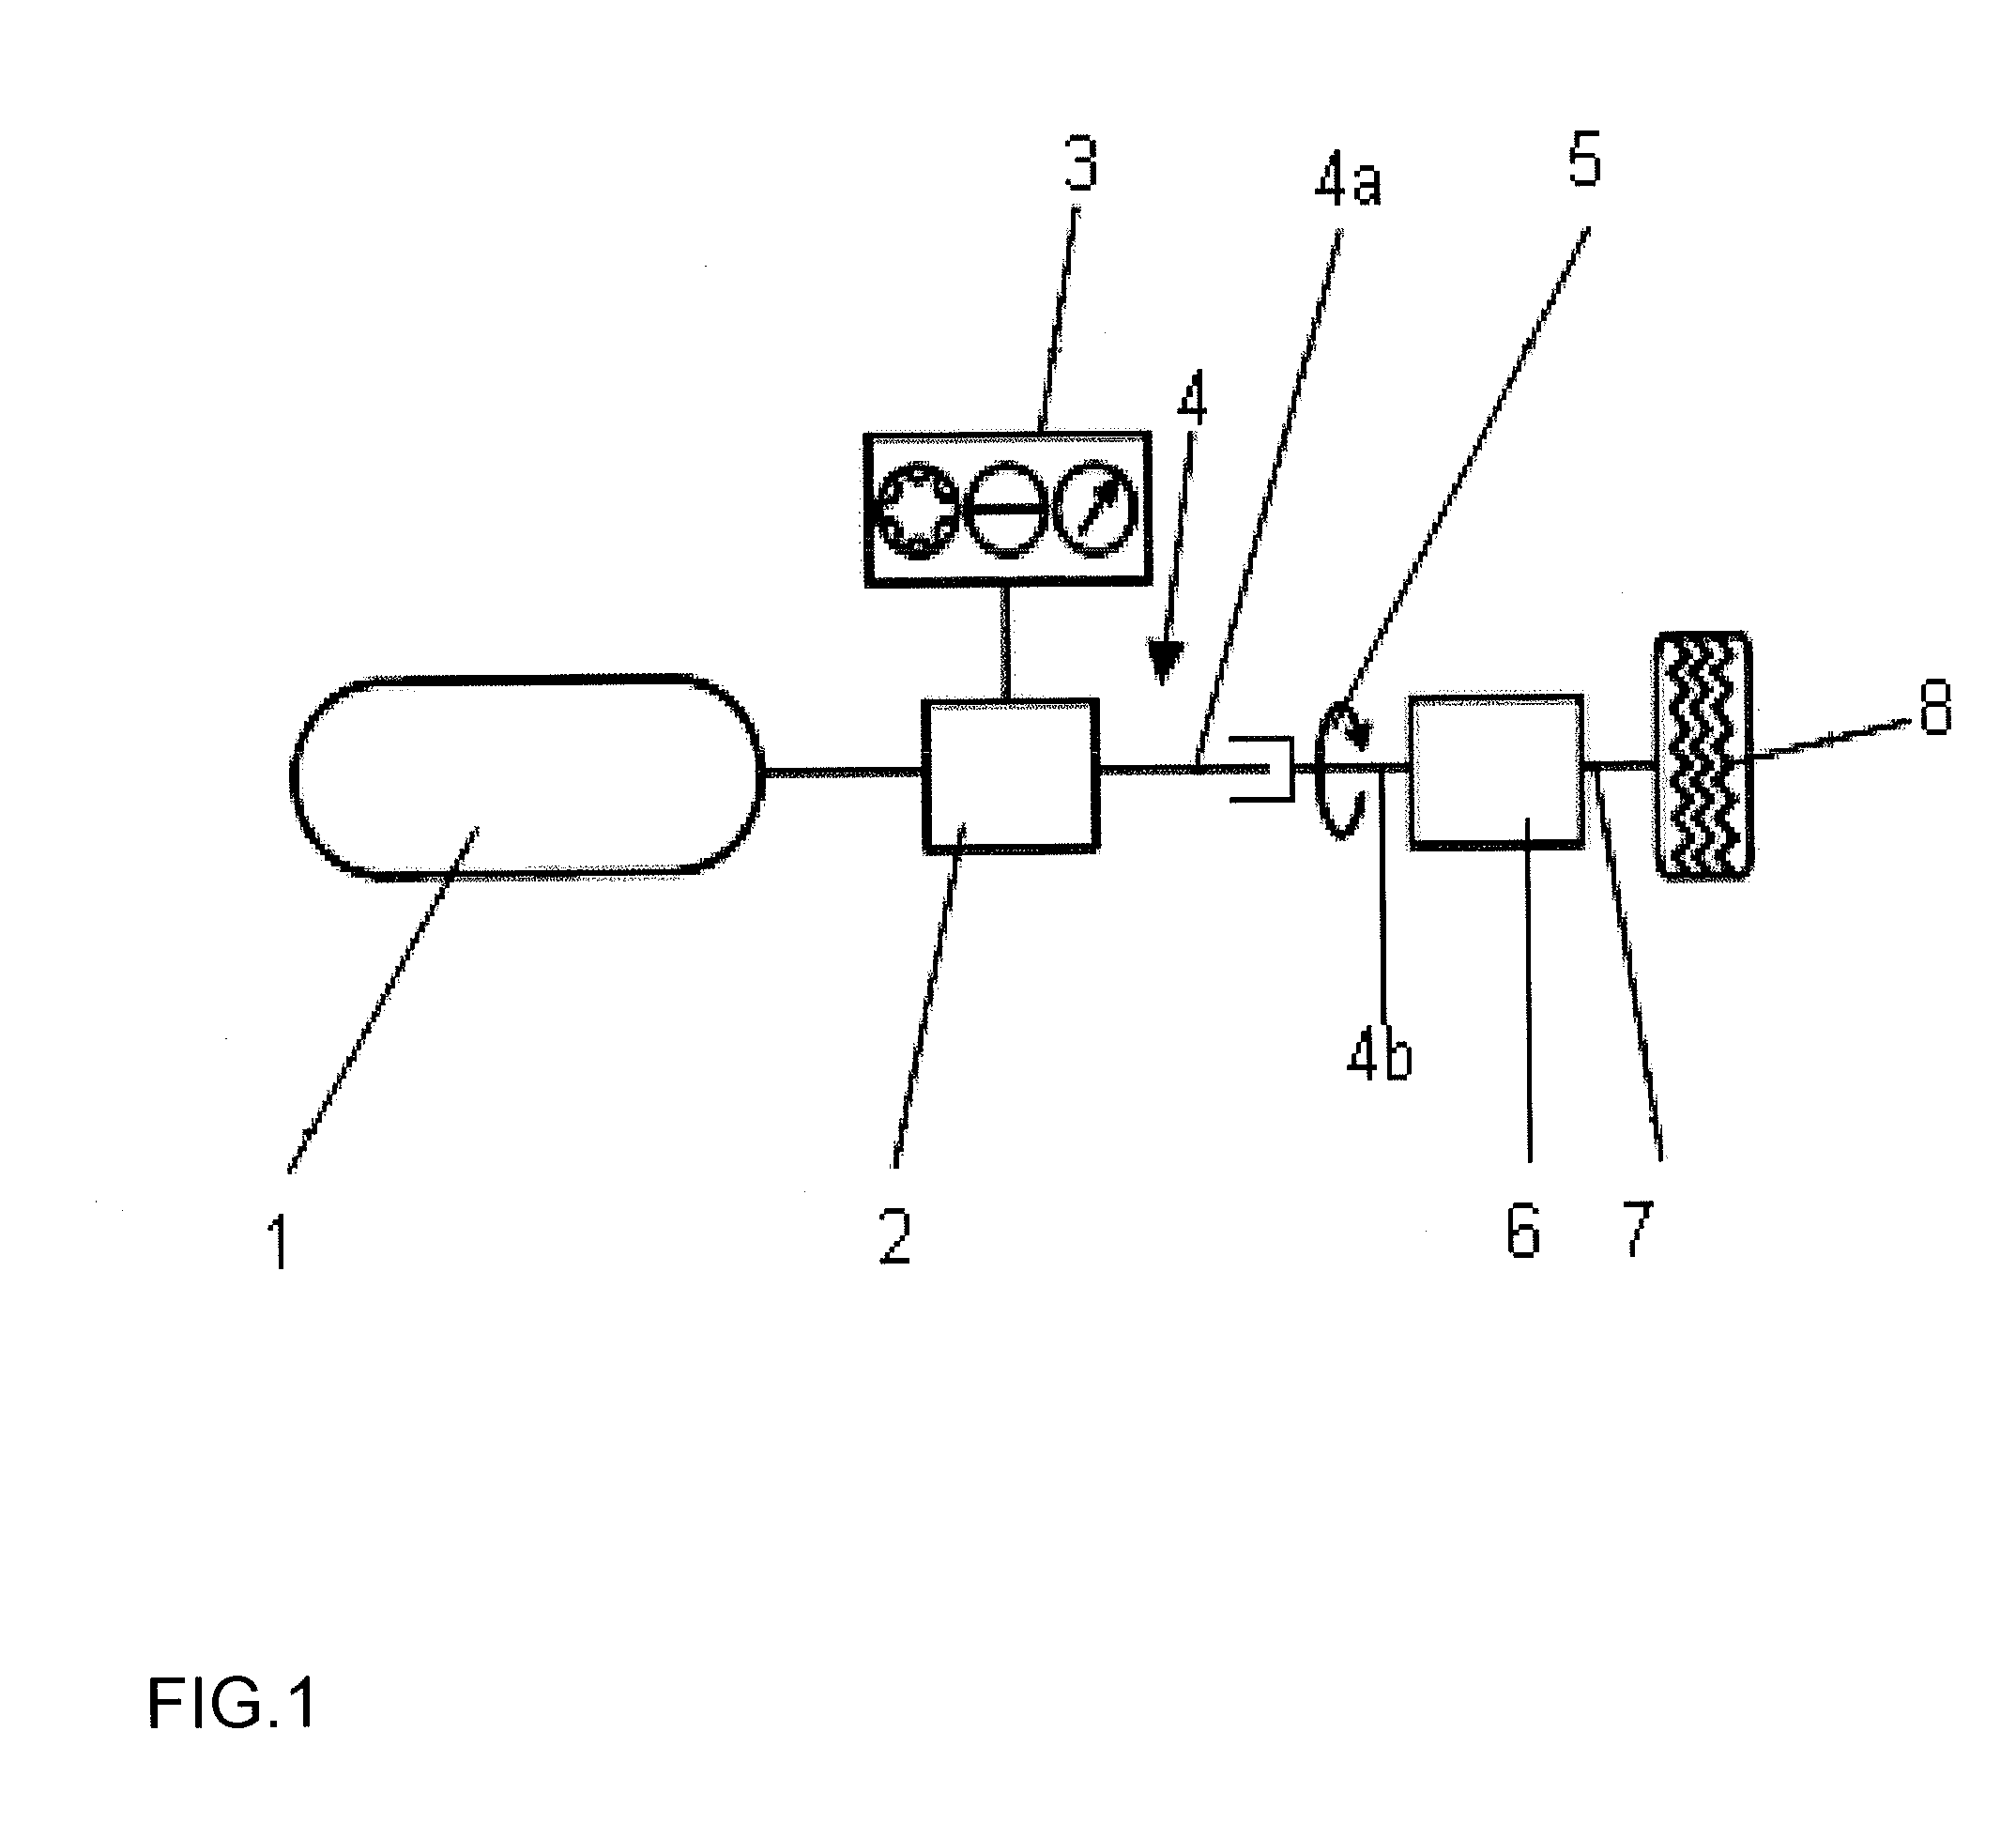 Device for Adapting the Tire Pressure During Travel